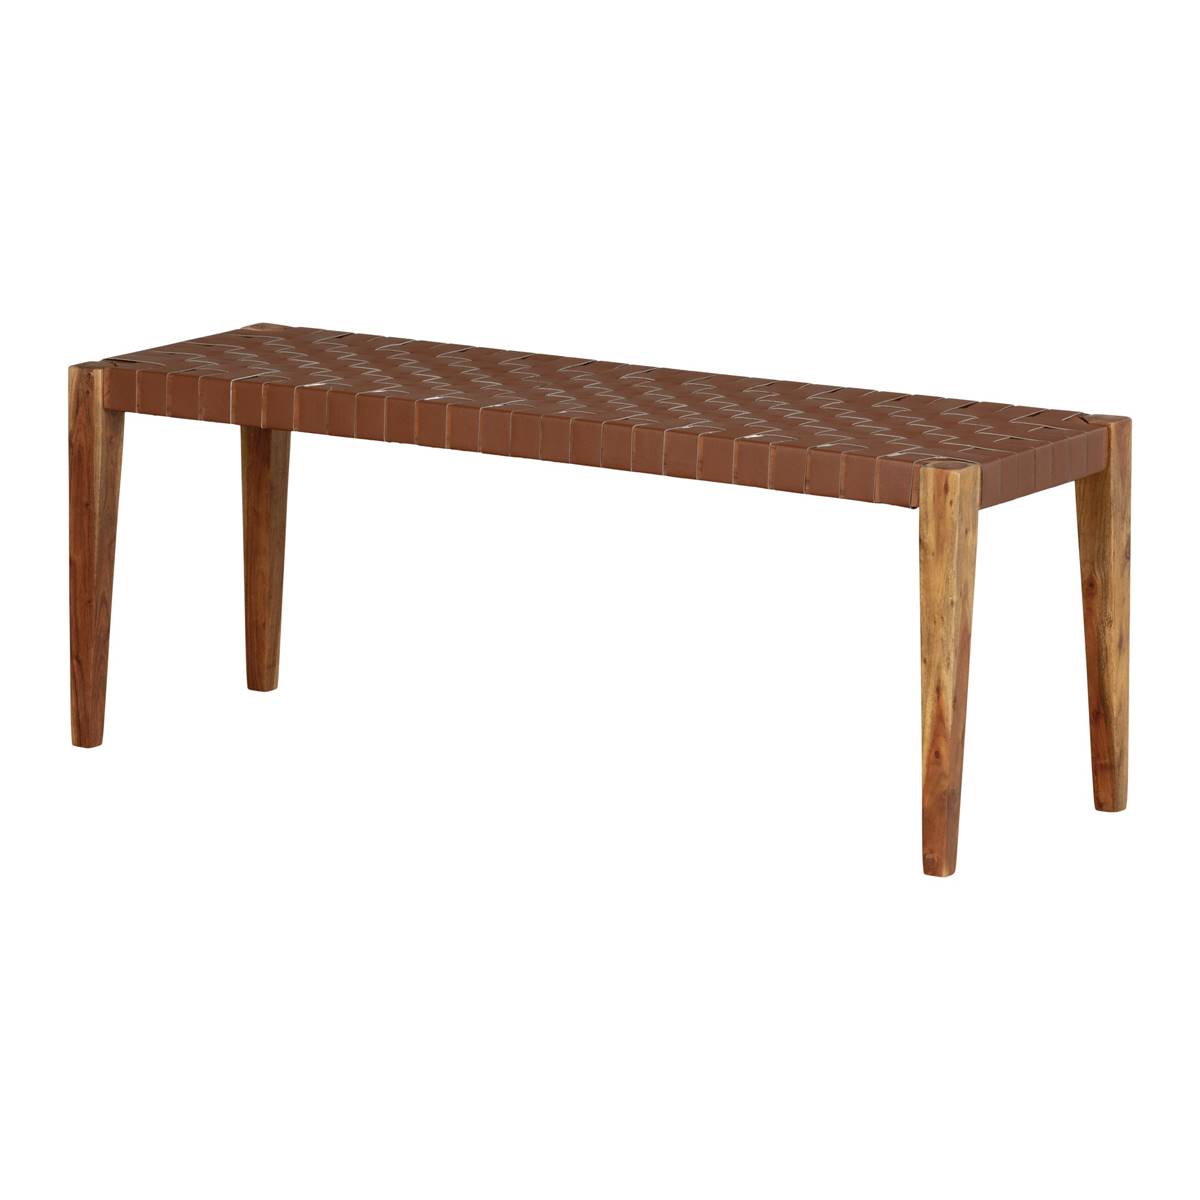 South Shore Hoya Woven Leather Bench